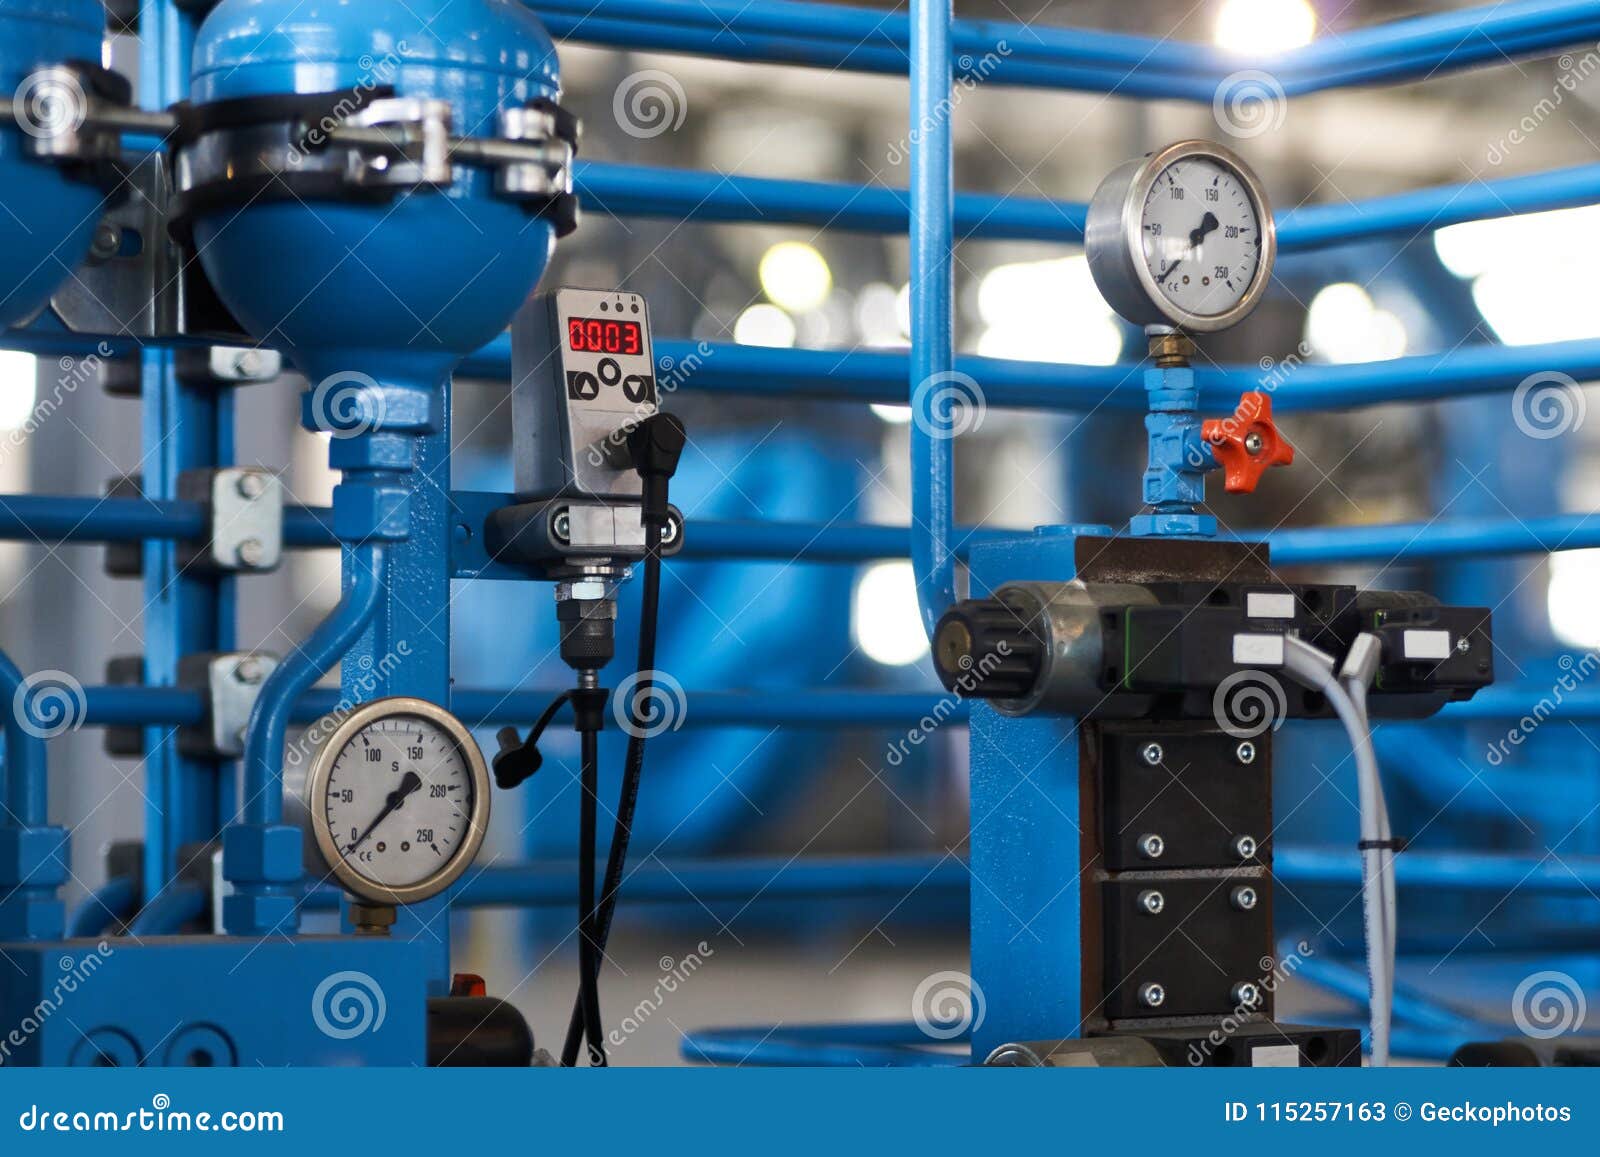 Close Up Of A Pressure Gauge Psi Meter Stock Image Image Of